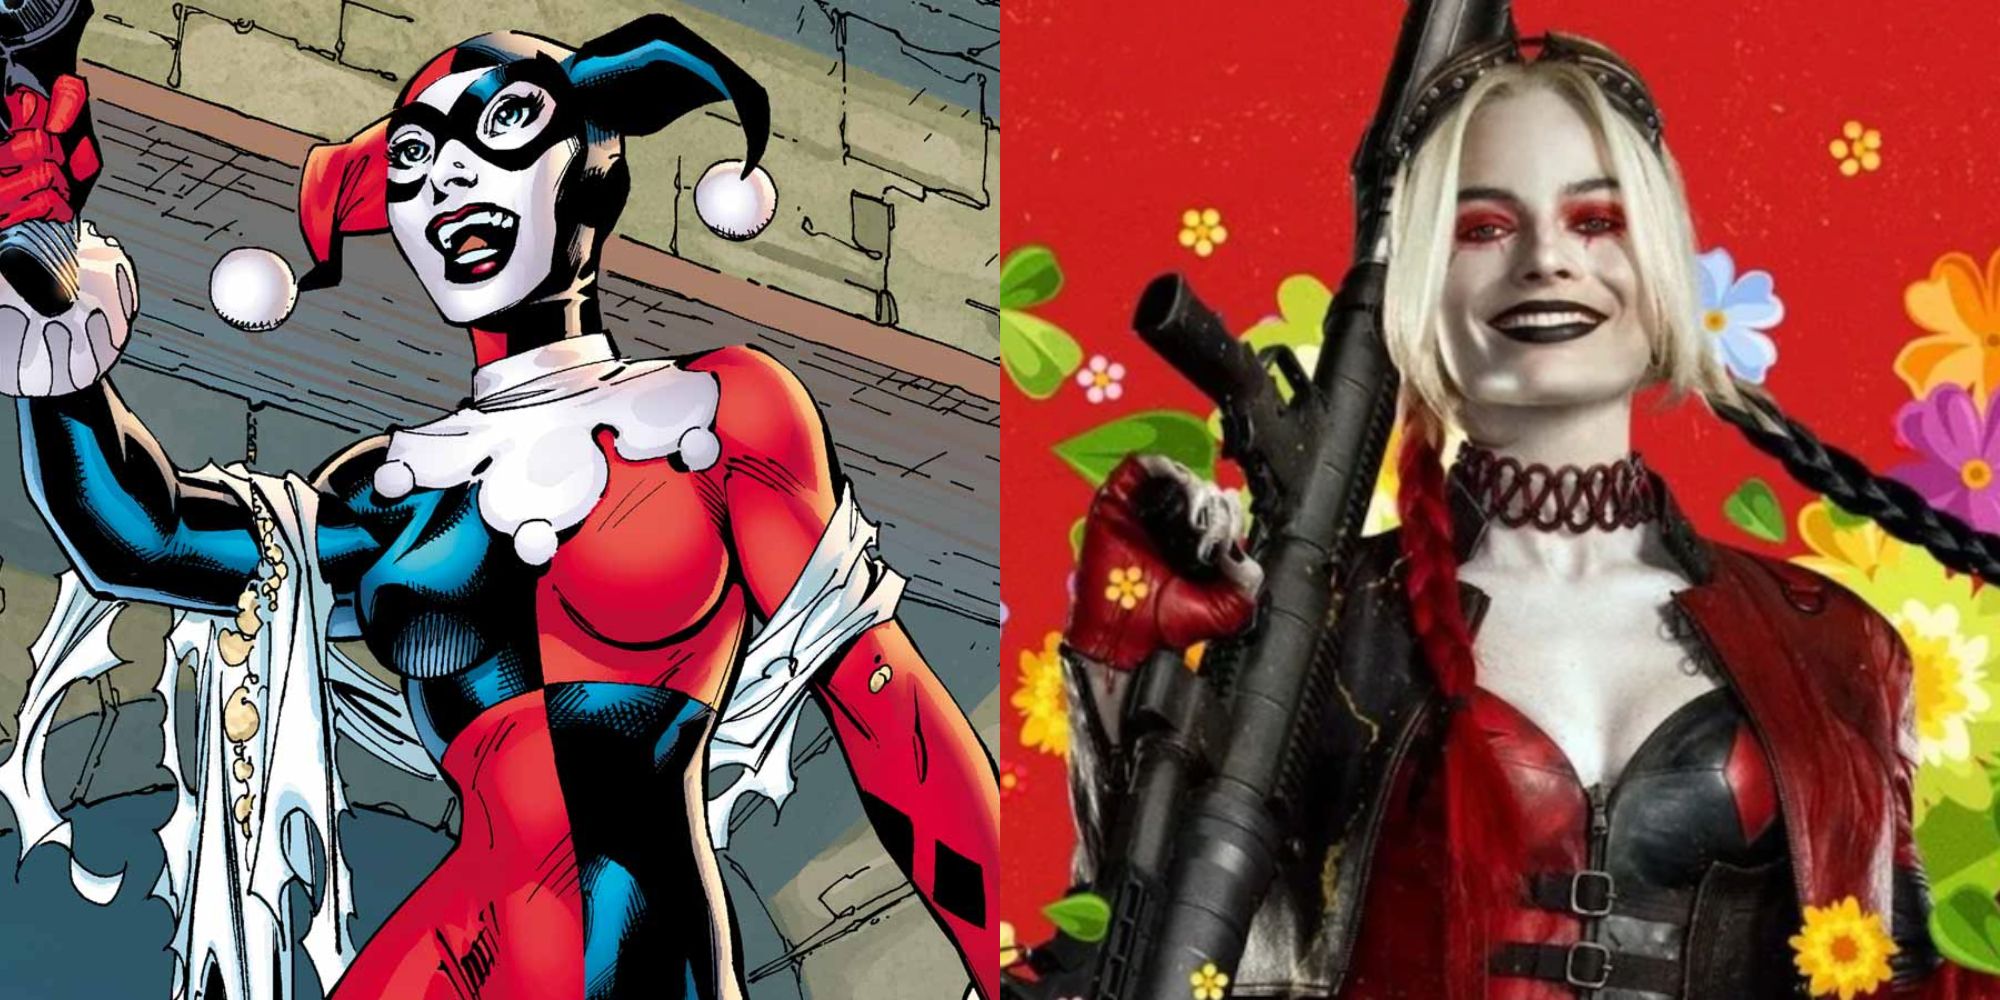 Split image showing Harley Quinn in the comics and in The Suicide Squad.